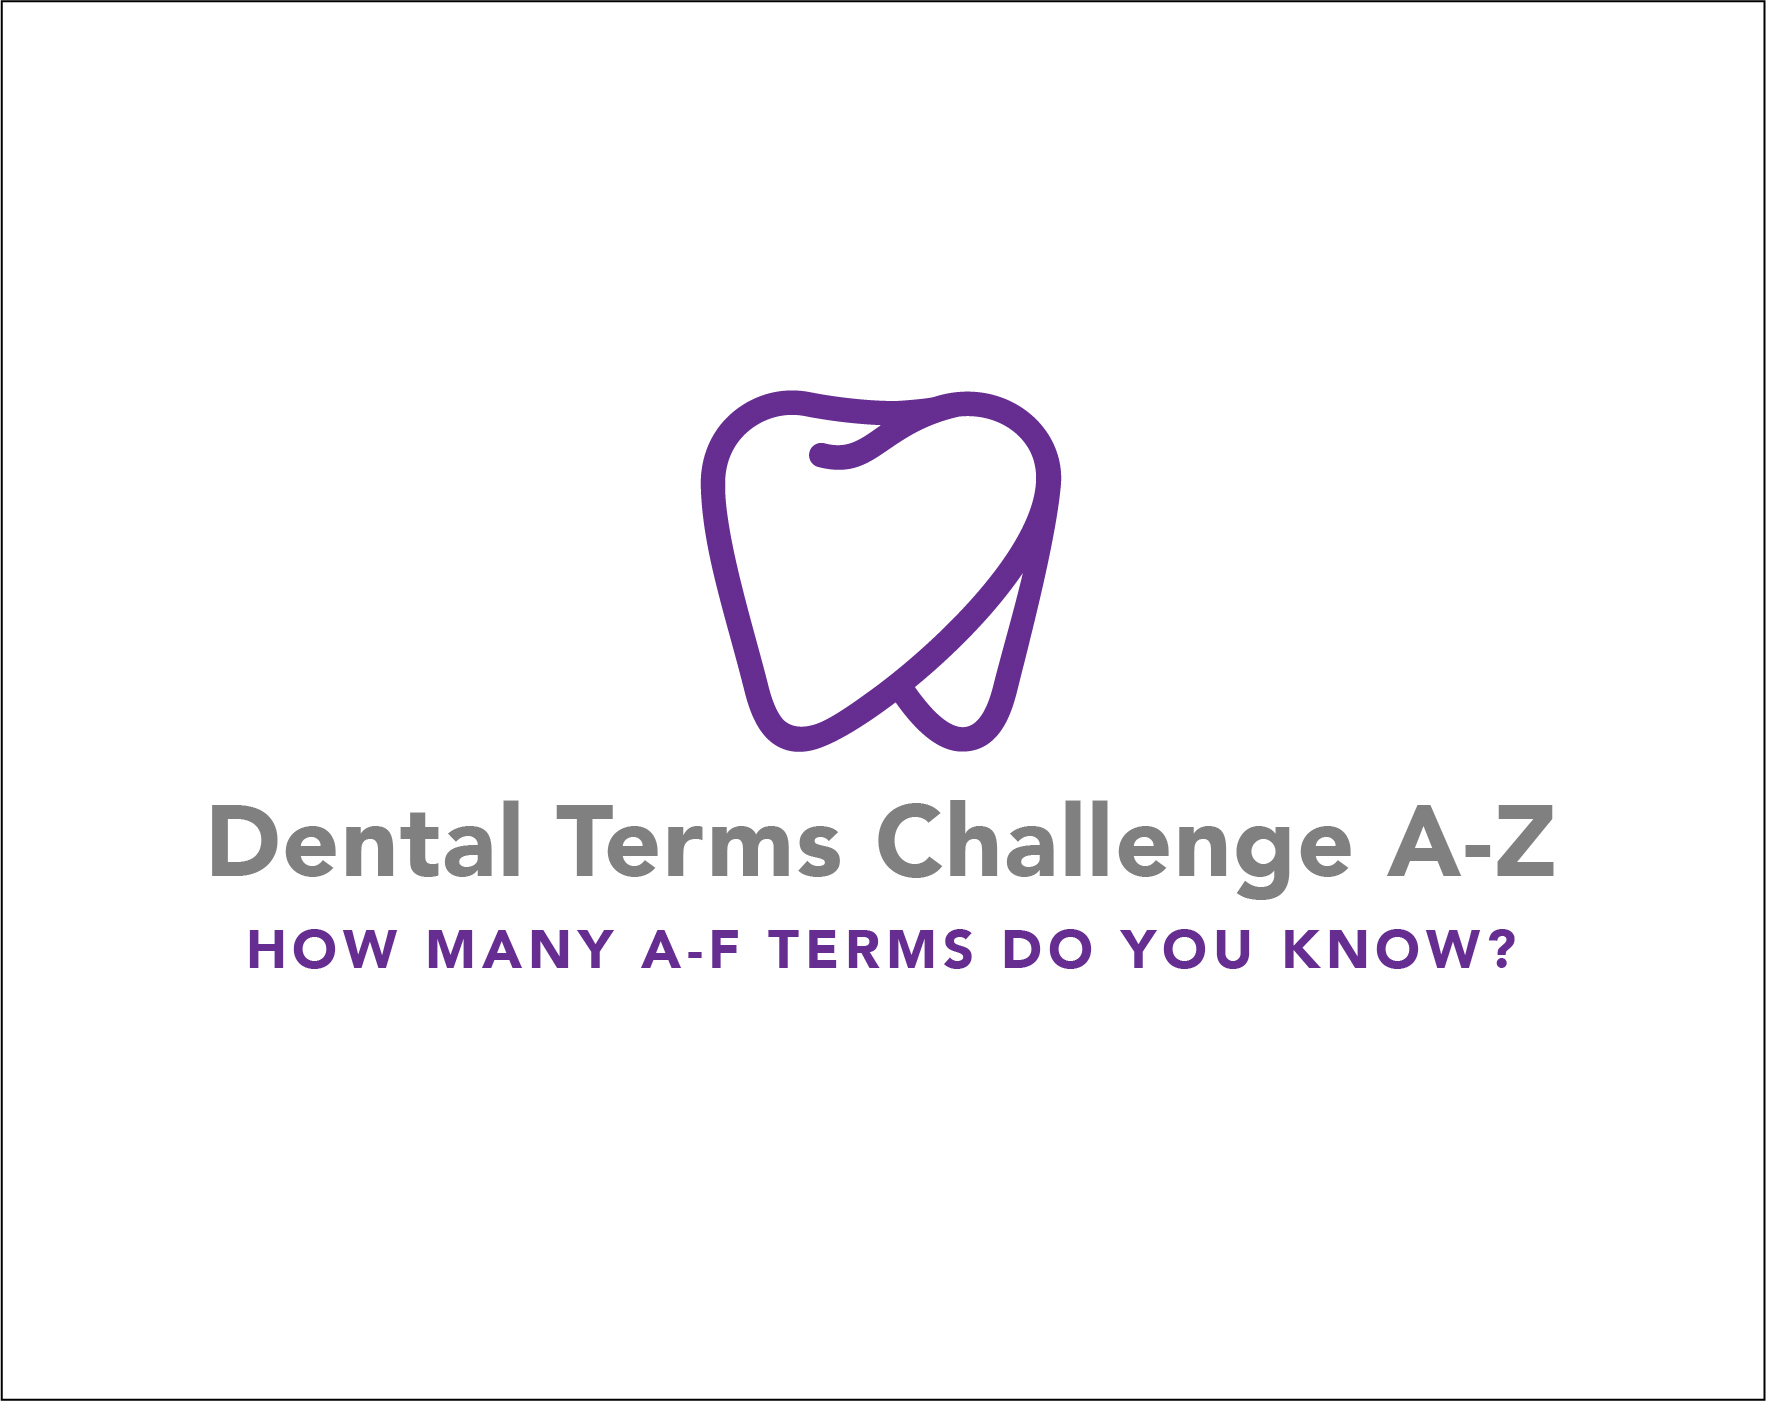 Dental Terms Challenge A-Z Part 1 – How many A-F dental terms do you know?